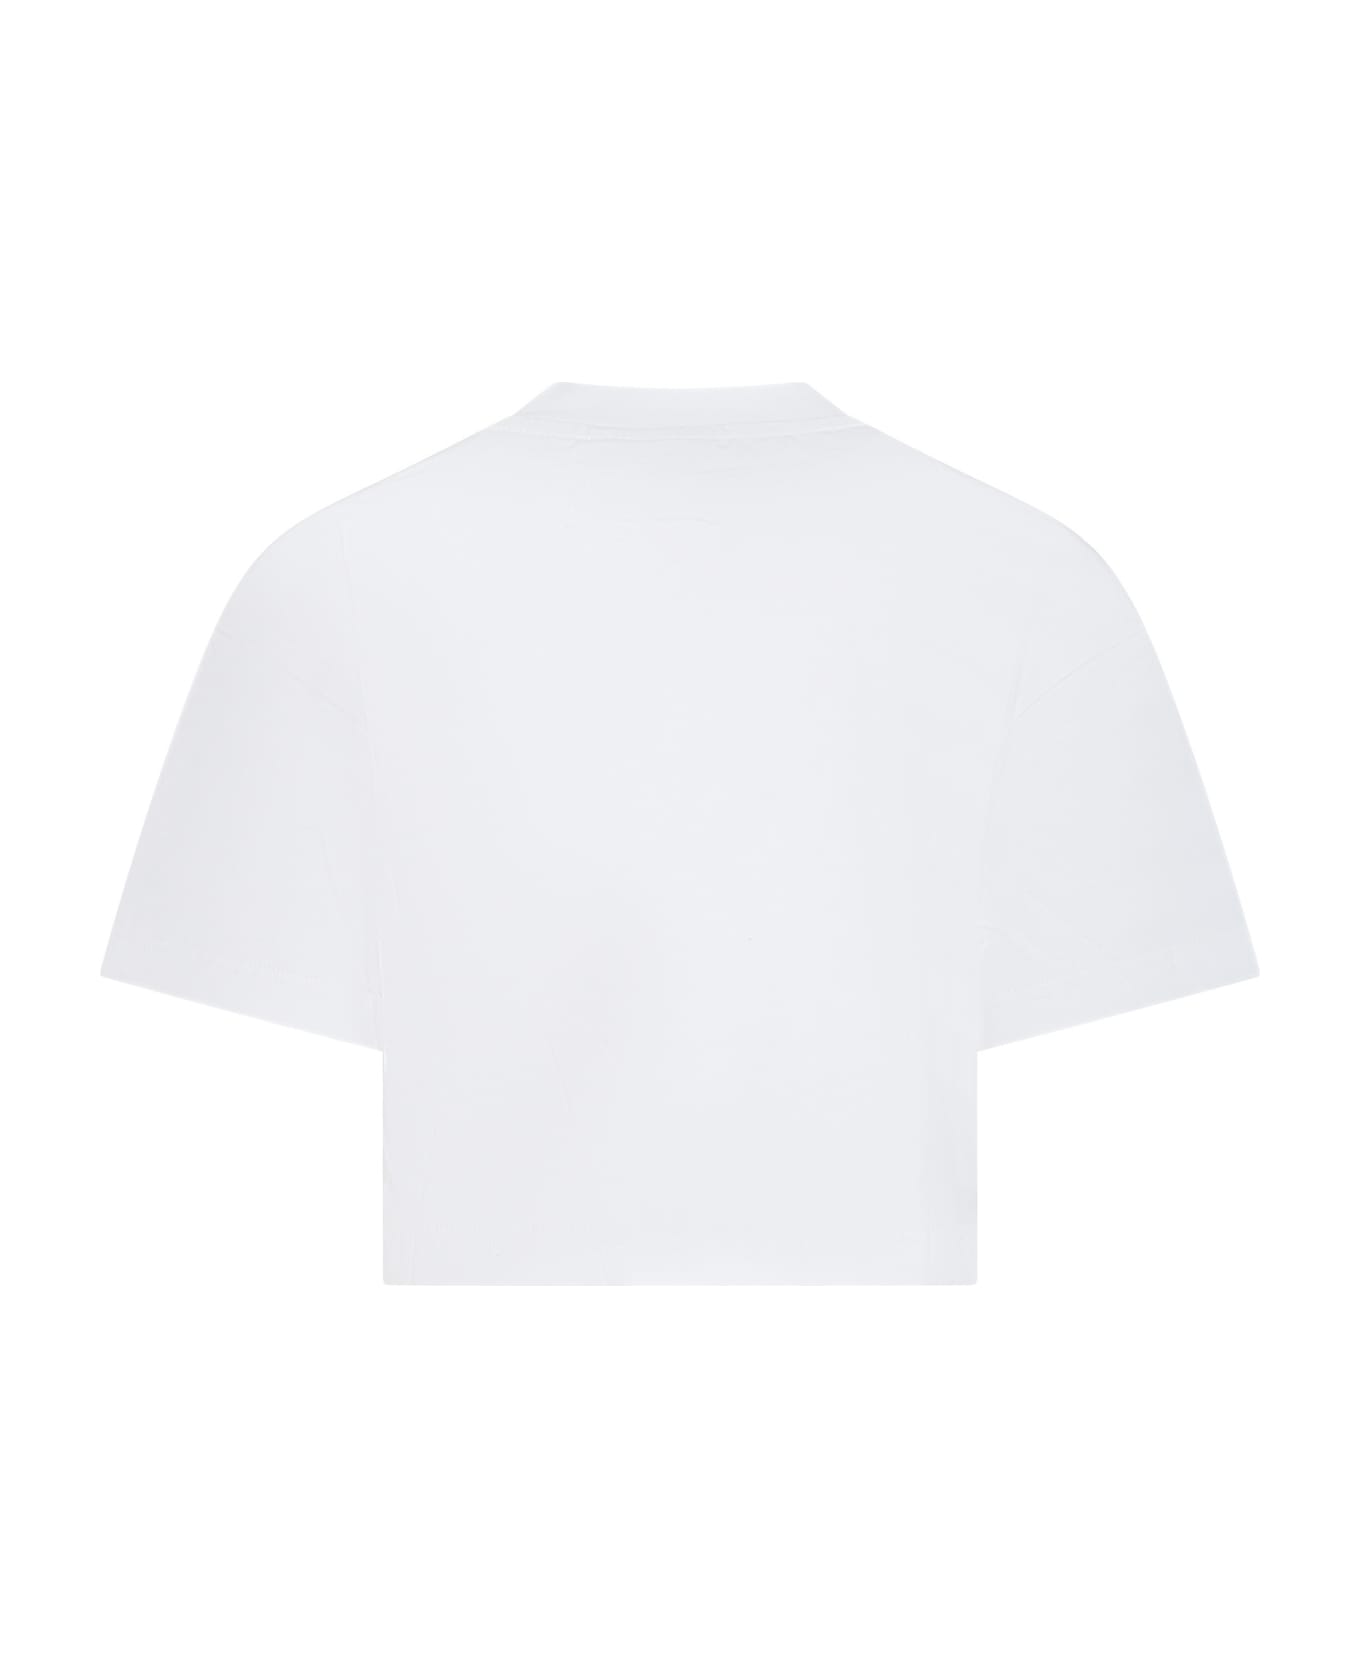 Barrow White T-shirt For Girl With Logo - Off white